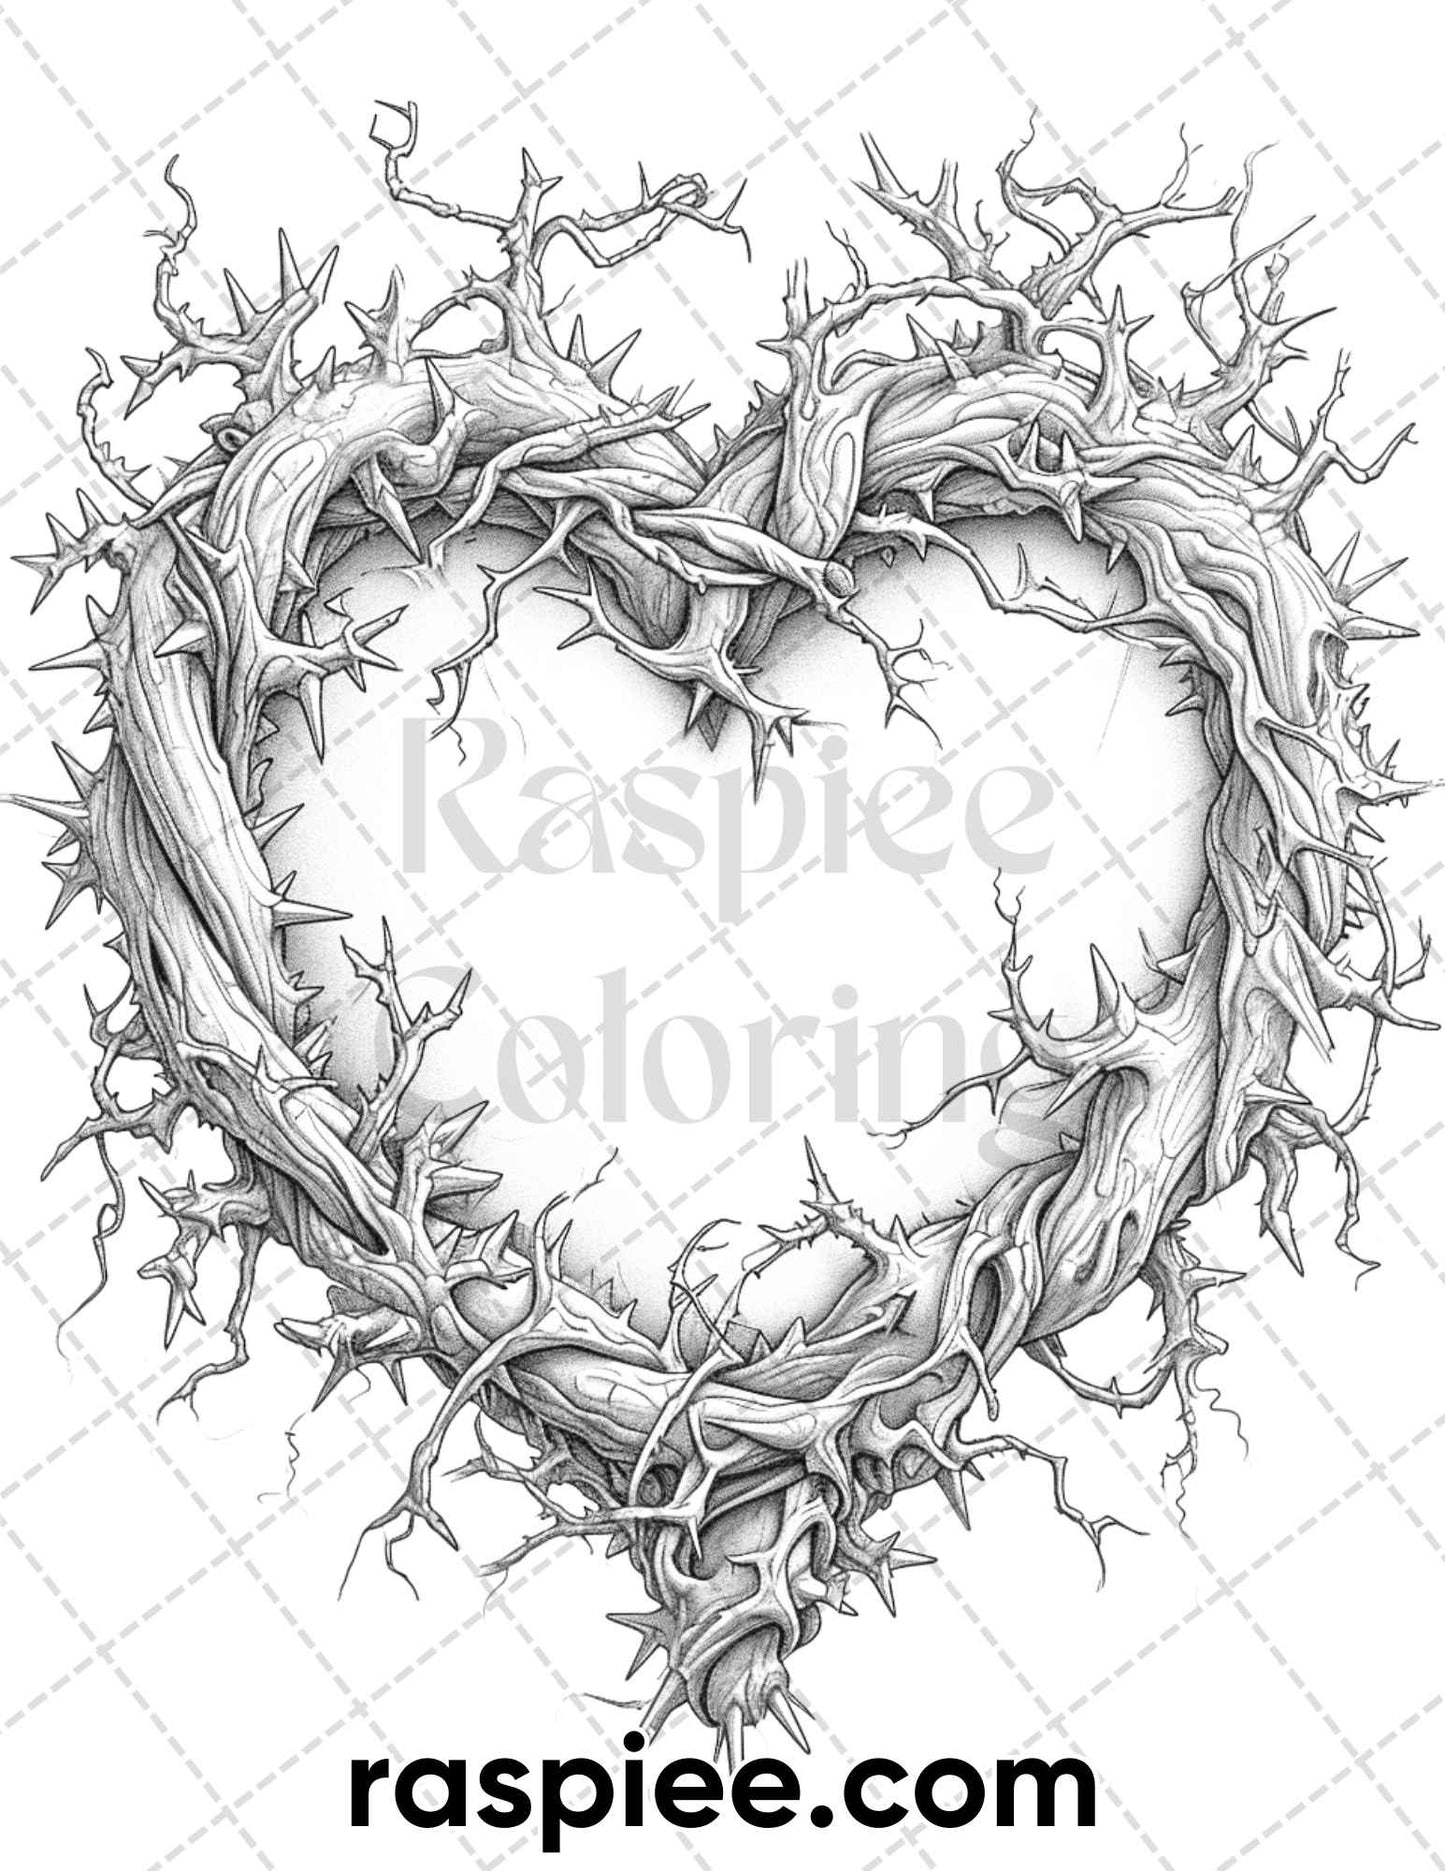 adult coloring pages, adult coloring sheets, adult coloring book pdf, adult coloring book printable, grayscale coloring pages, grayscale coloring books, gothic coloring pages for adults, gothic coloring book, valentines day coloring pages for adults, grayscale illustration, valentines day coloring book